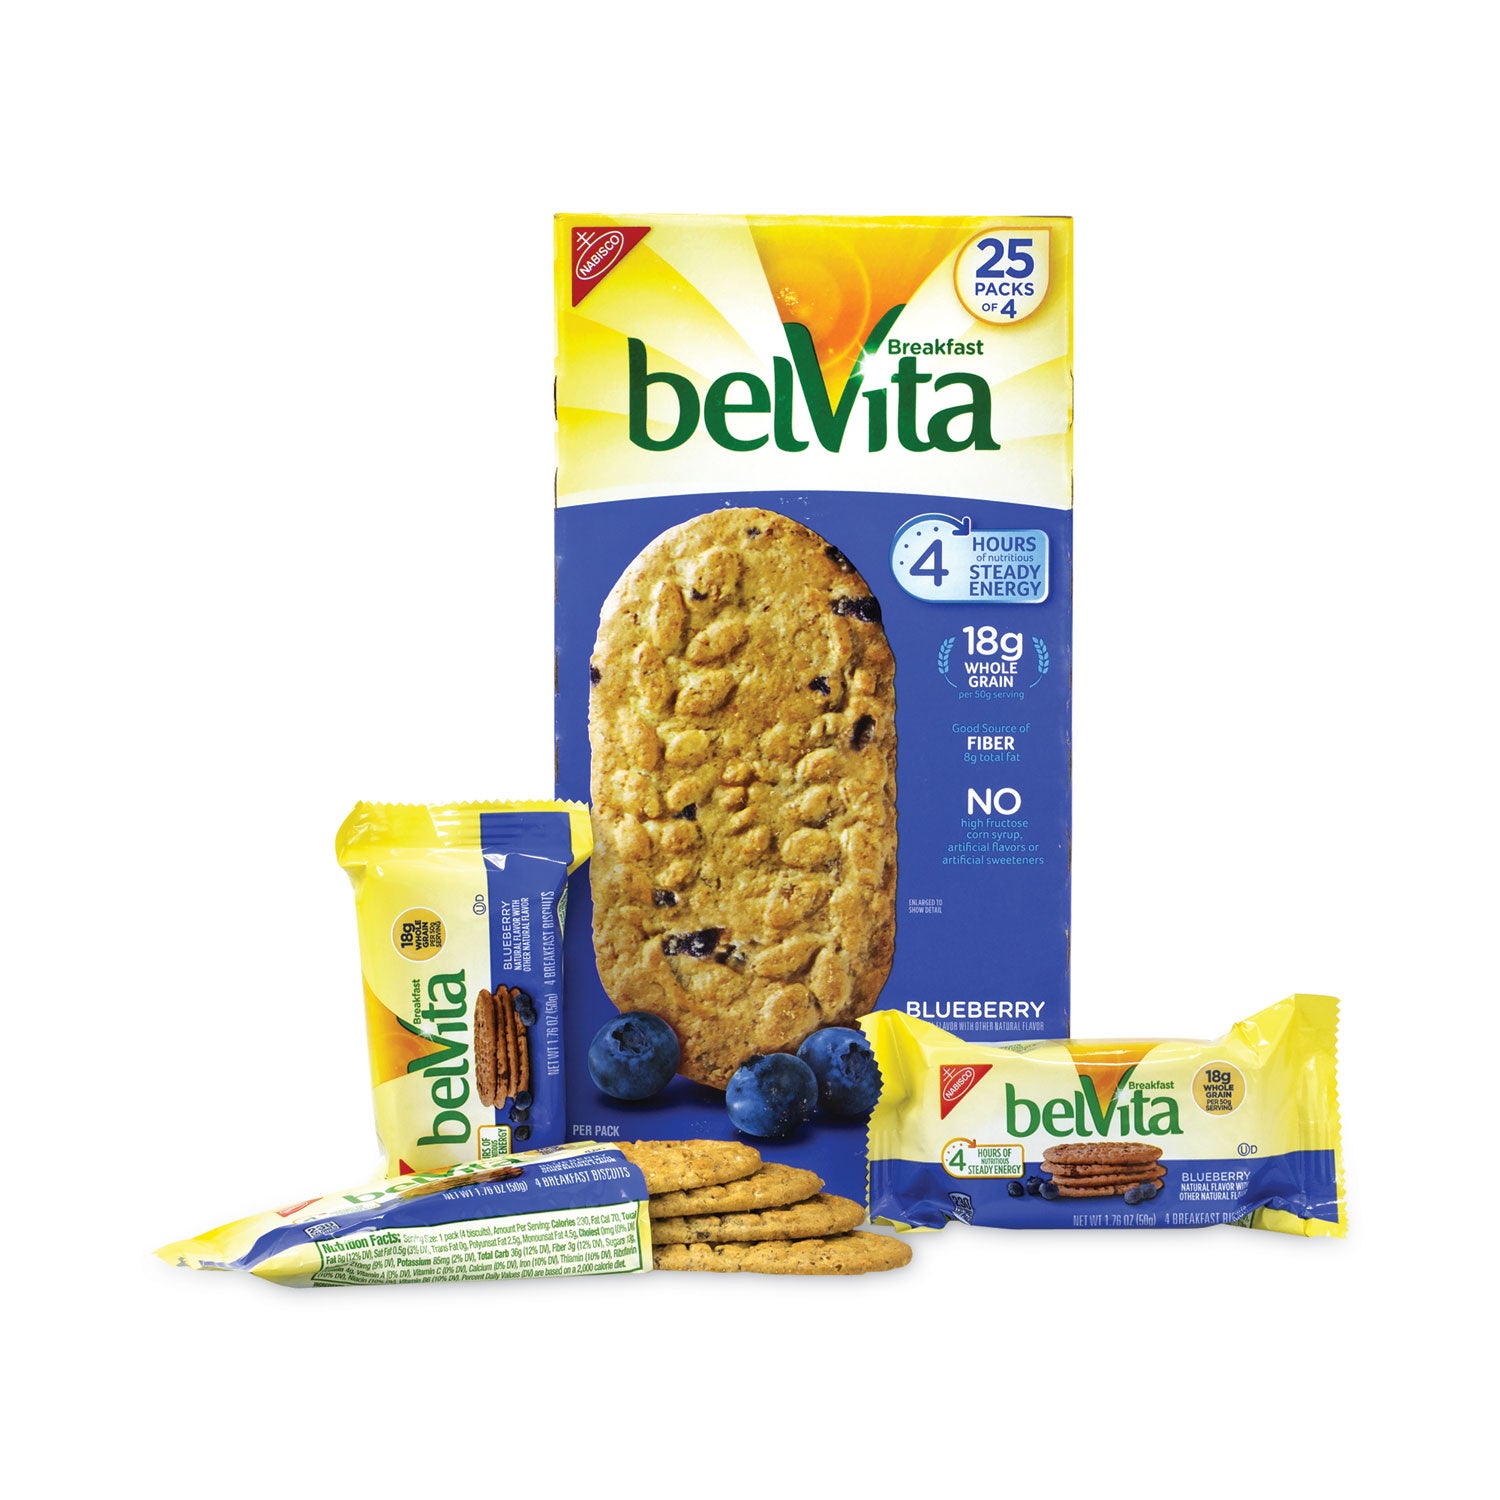 belvita-breakfast-biscuits-blueberry-176-oz-pack-25-packs-carton-ships-in-1-3-business-days_grr22000506 - 2